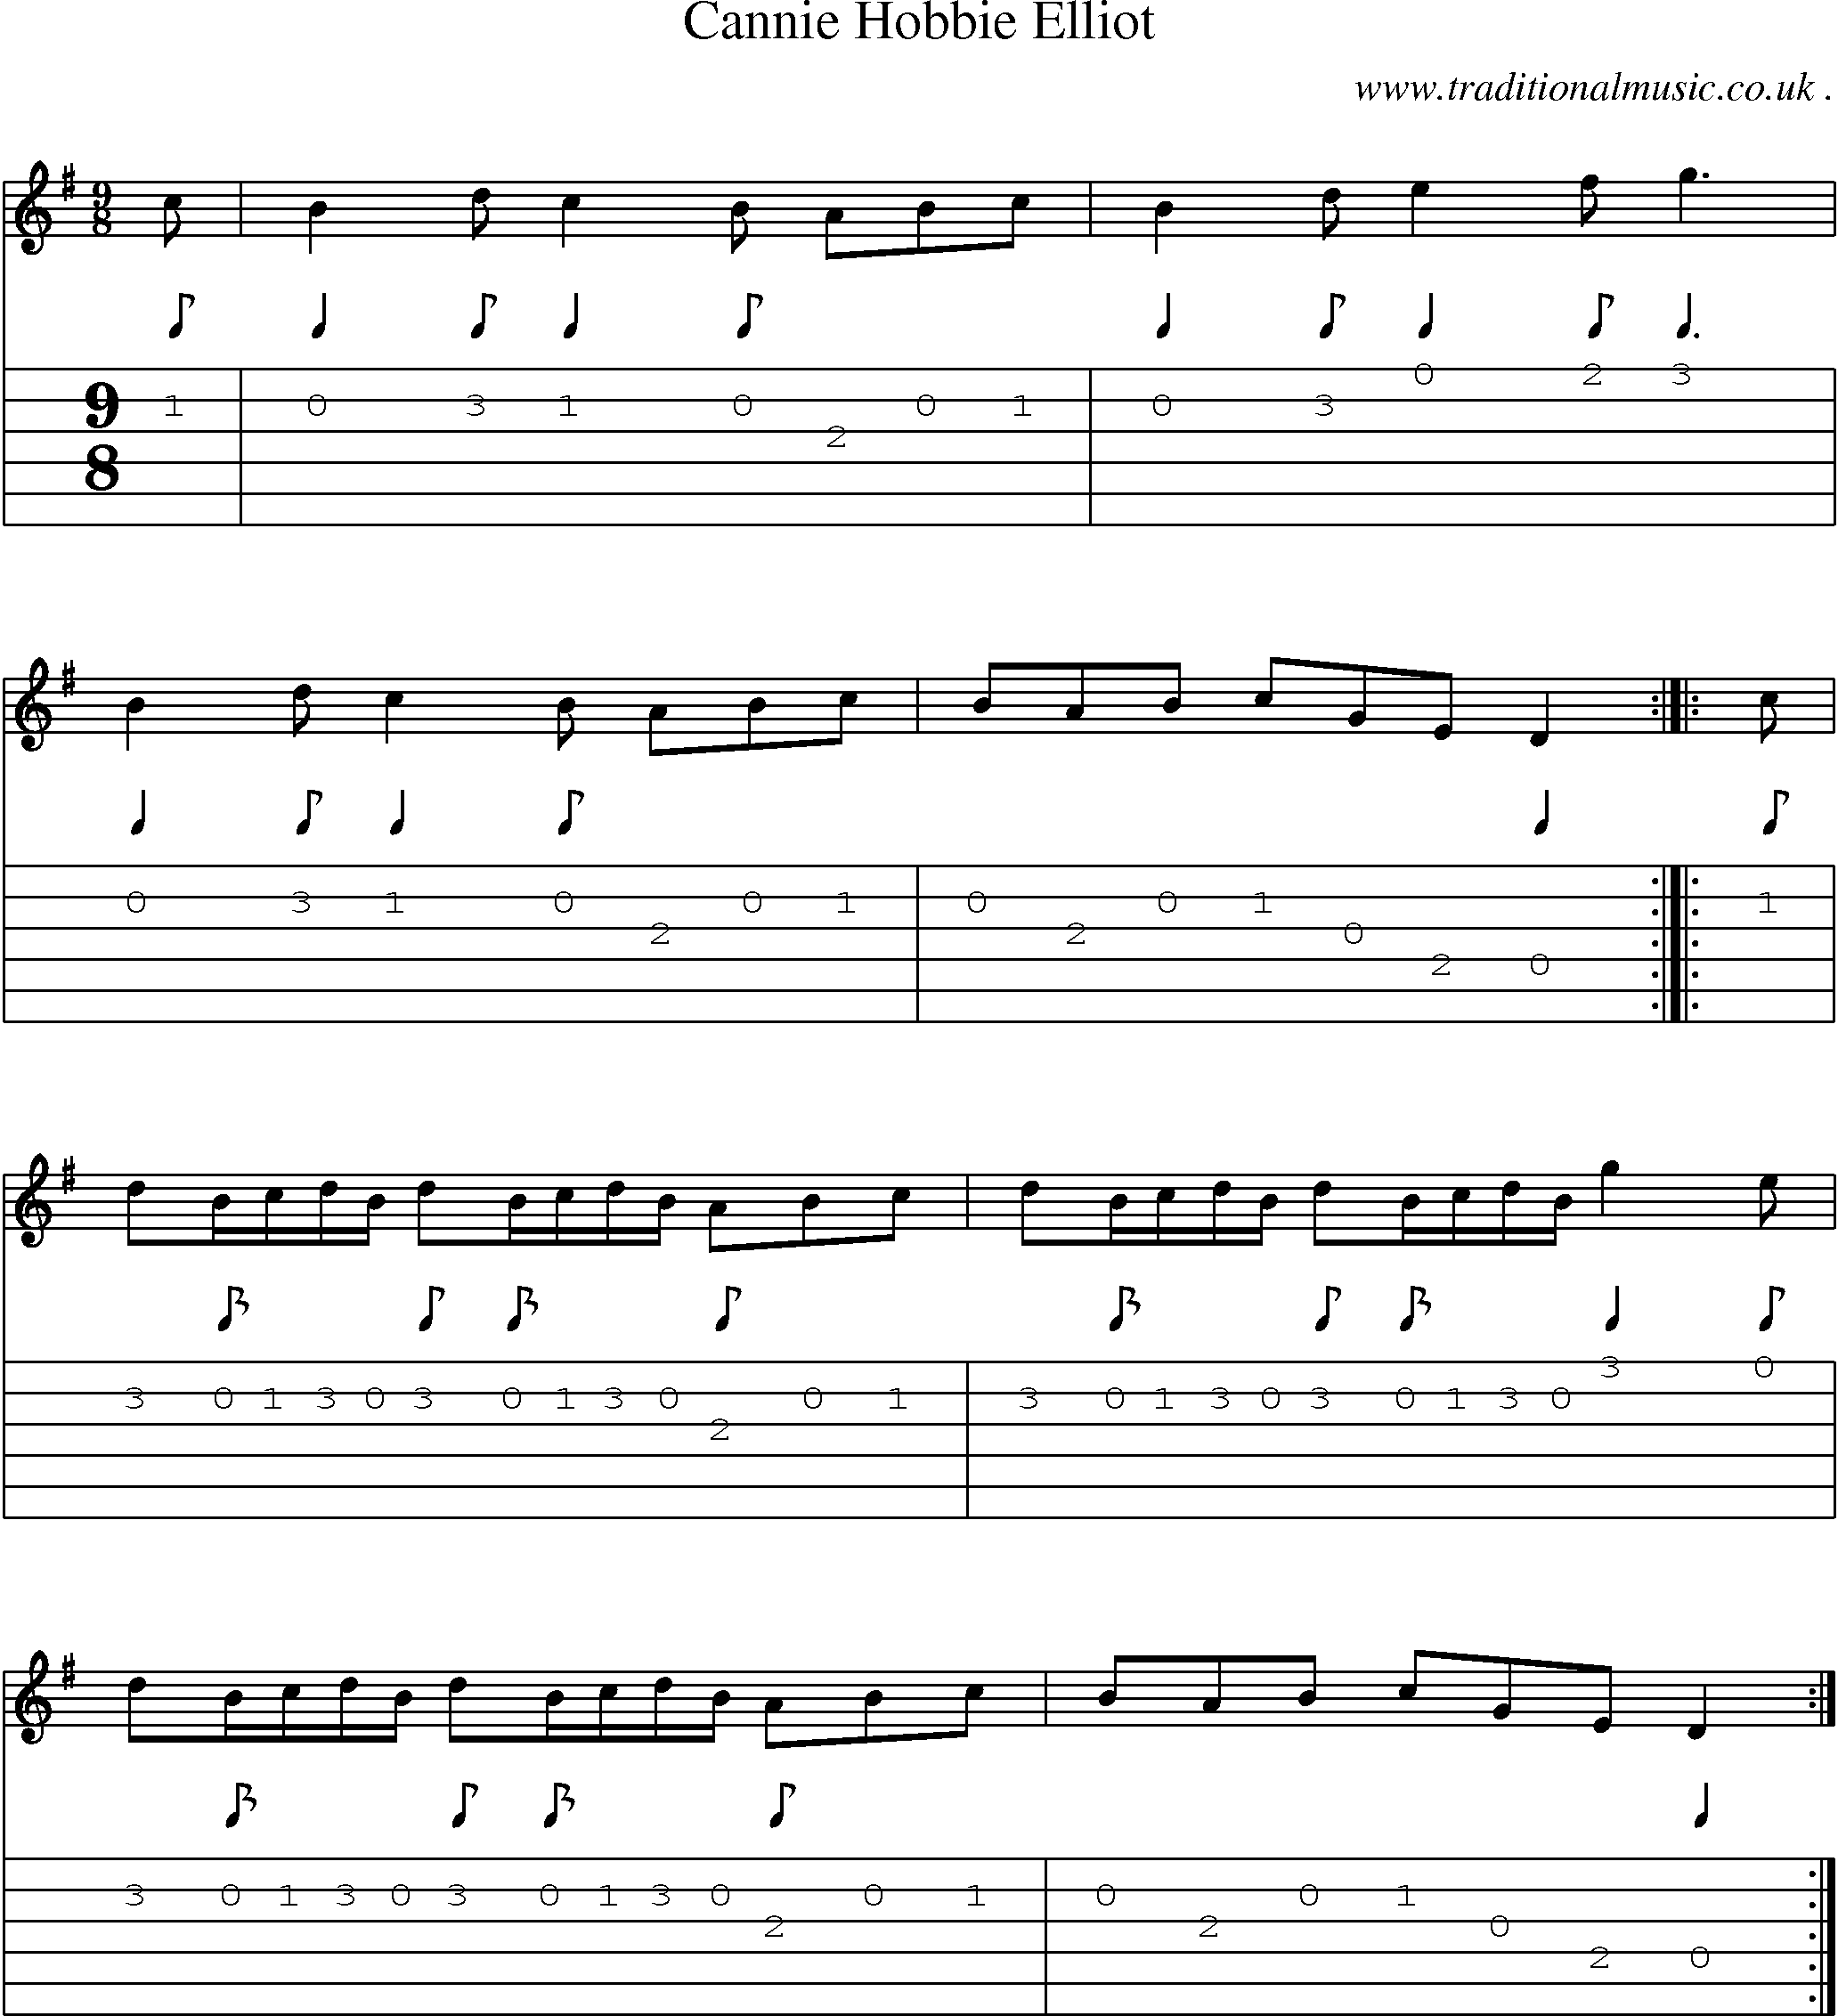 Sheet-Music and Guitar Tabs for Cannie Hobbie Elliot